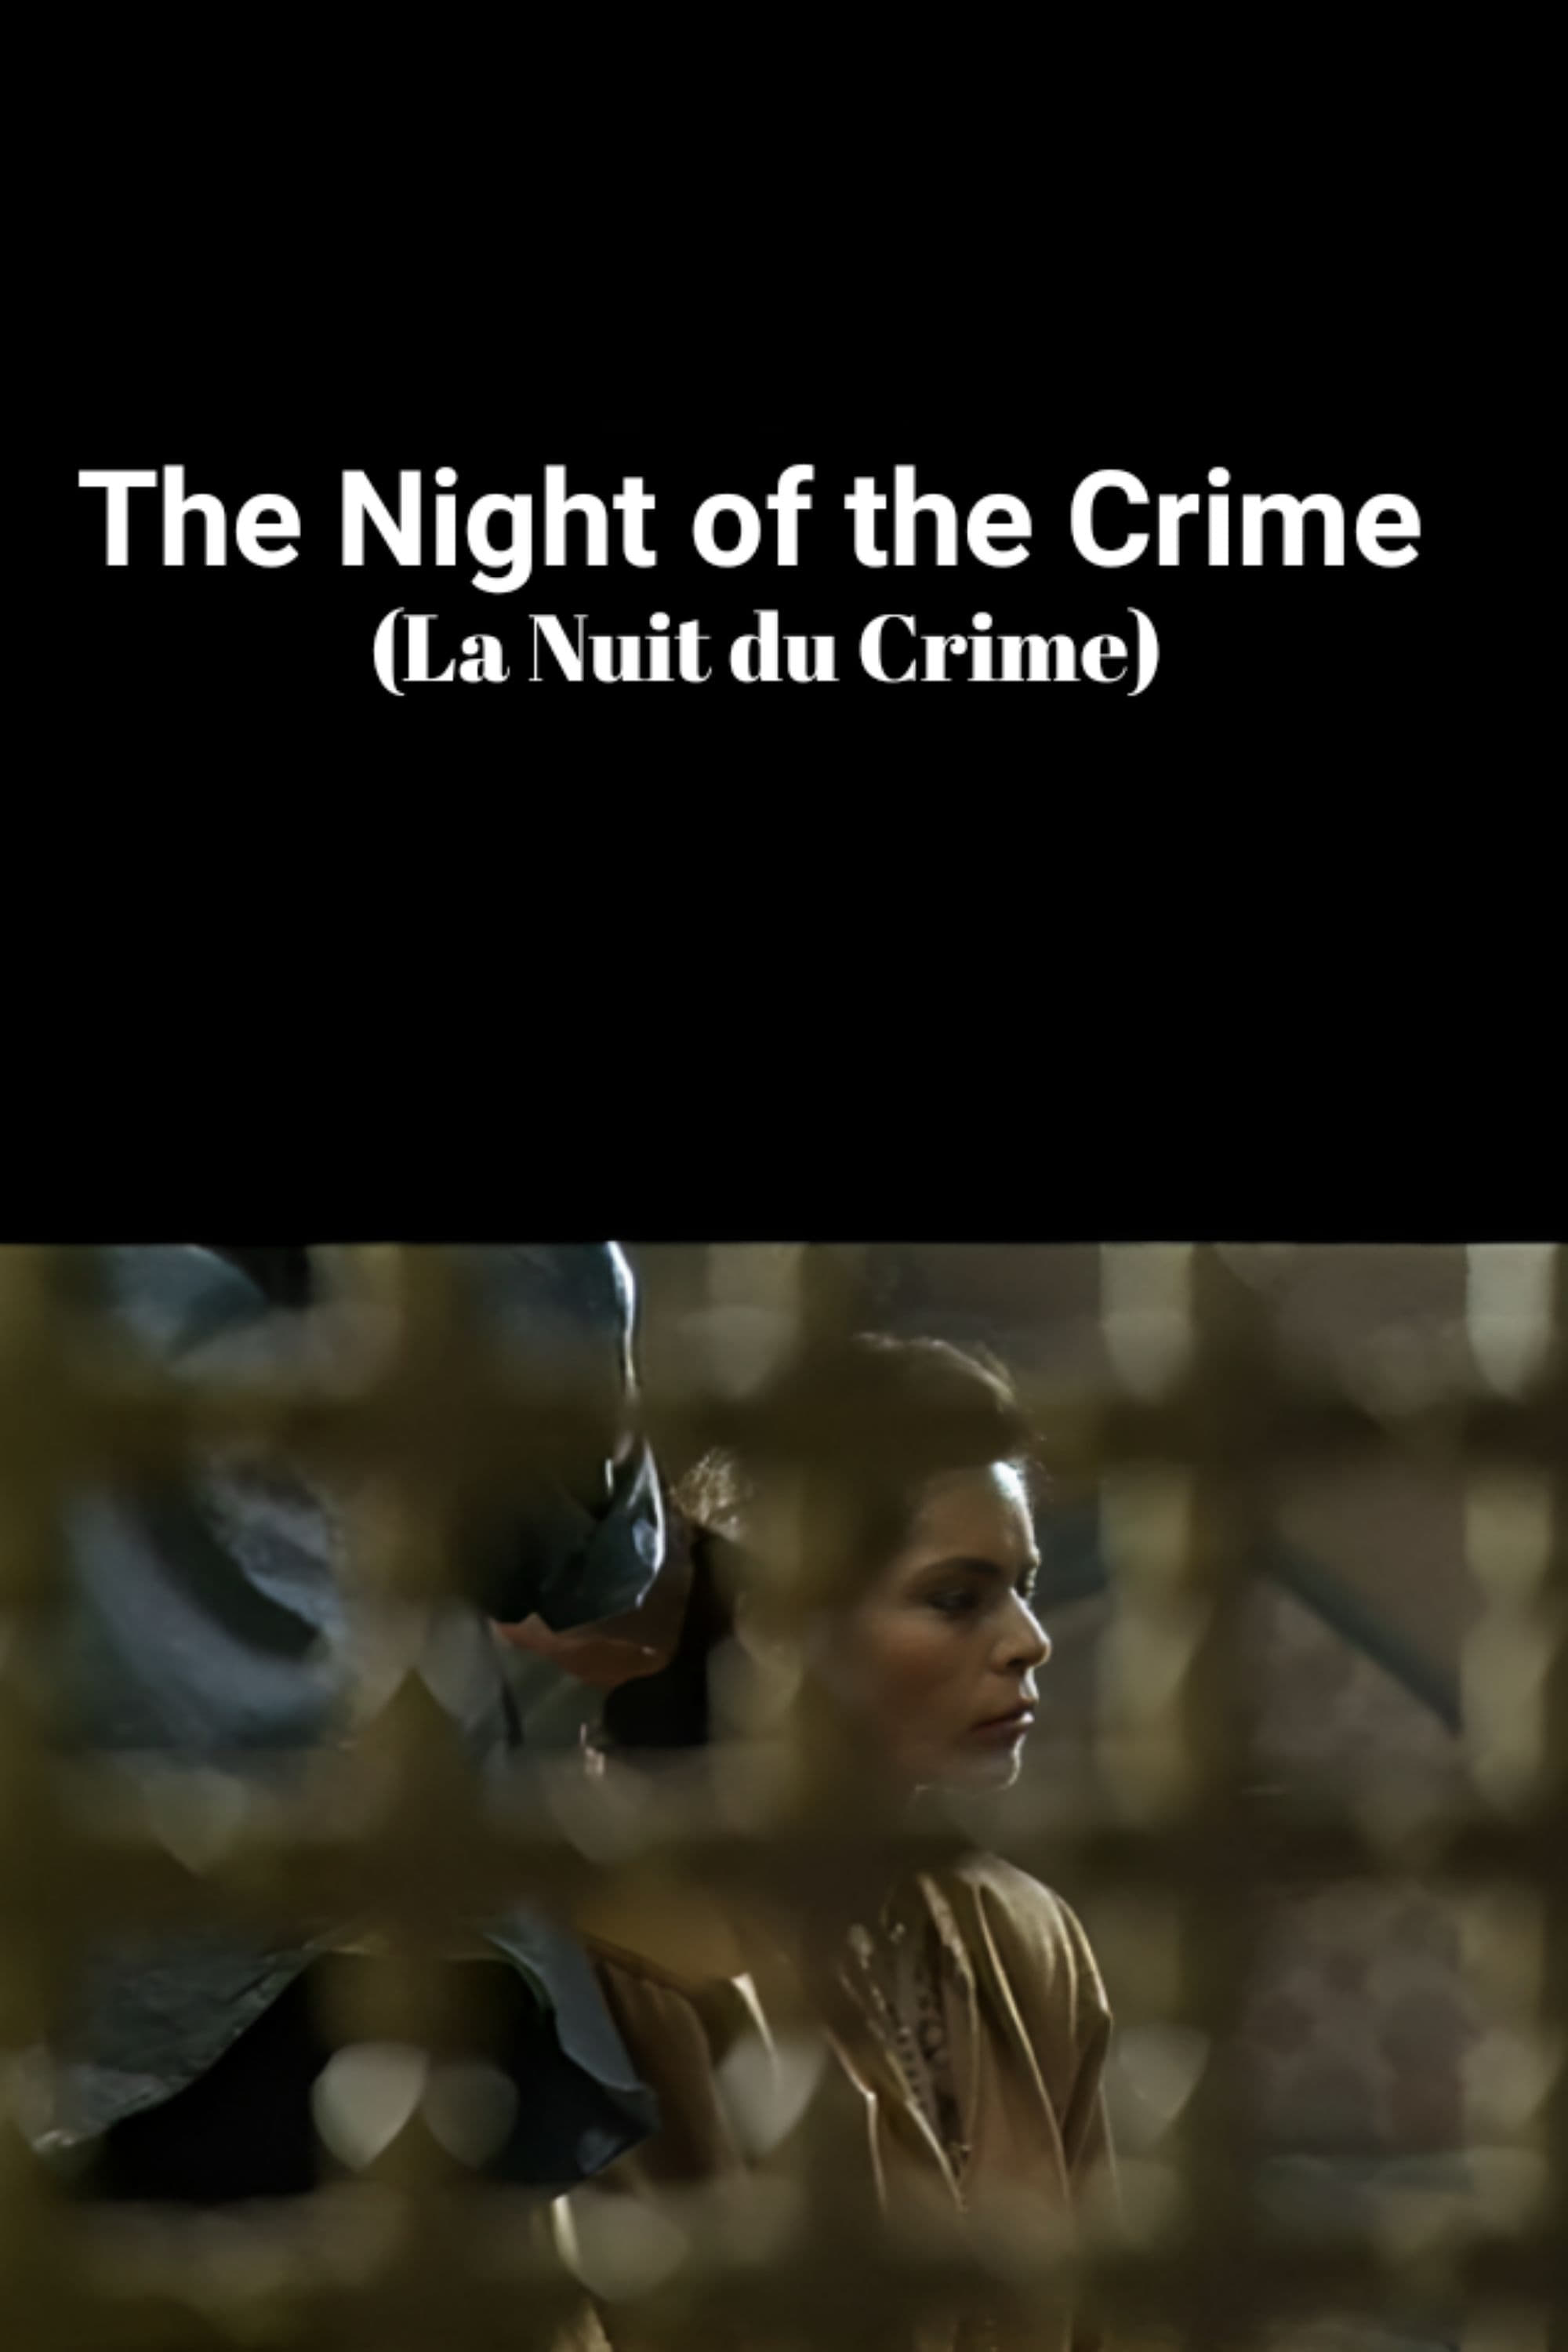 The Night of the Crime